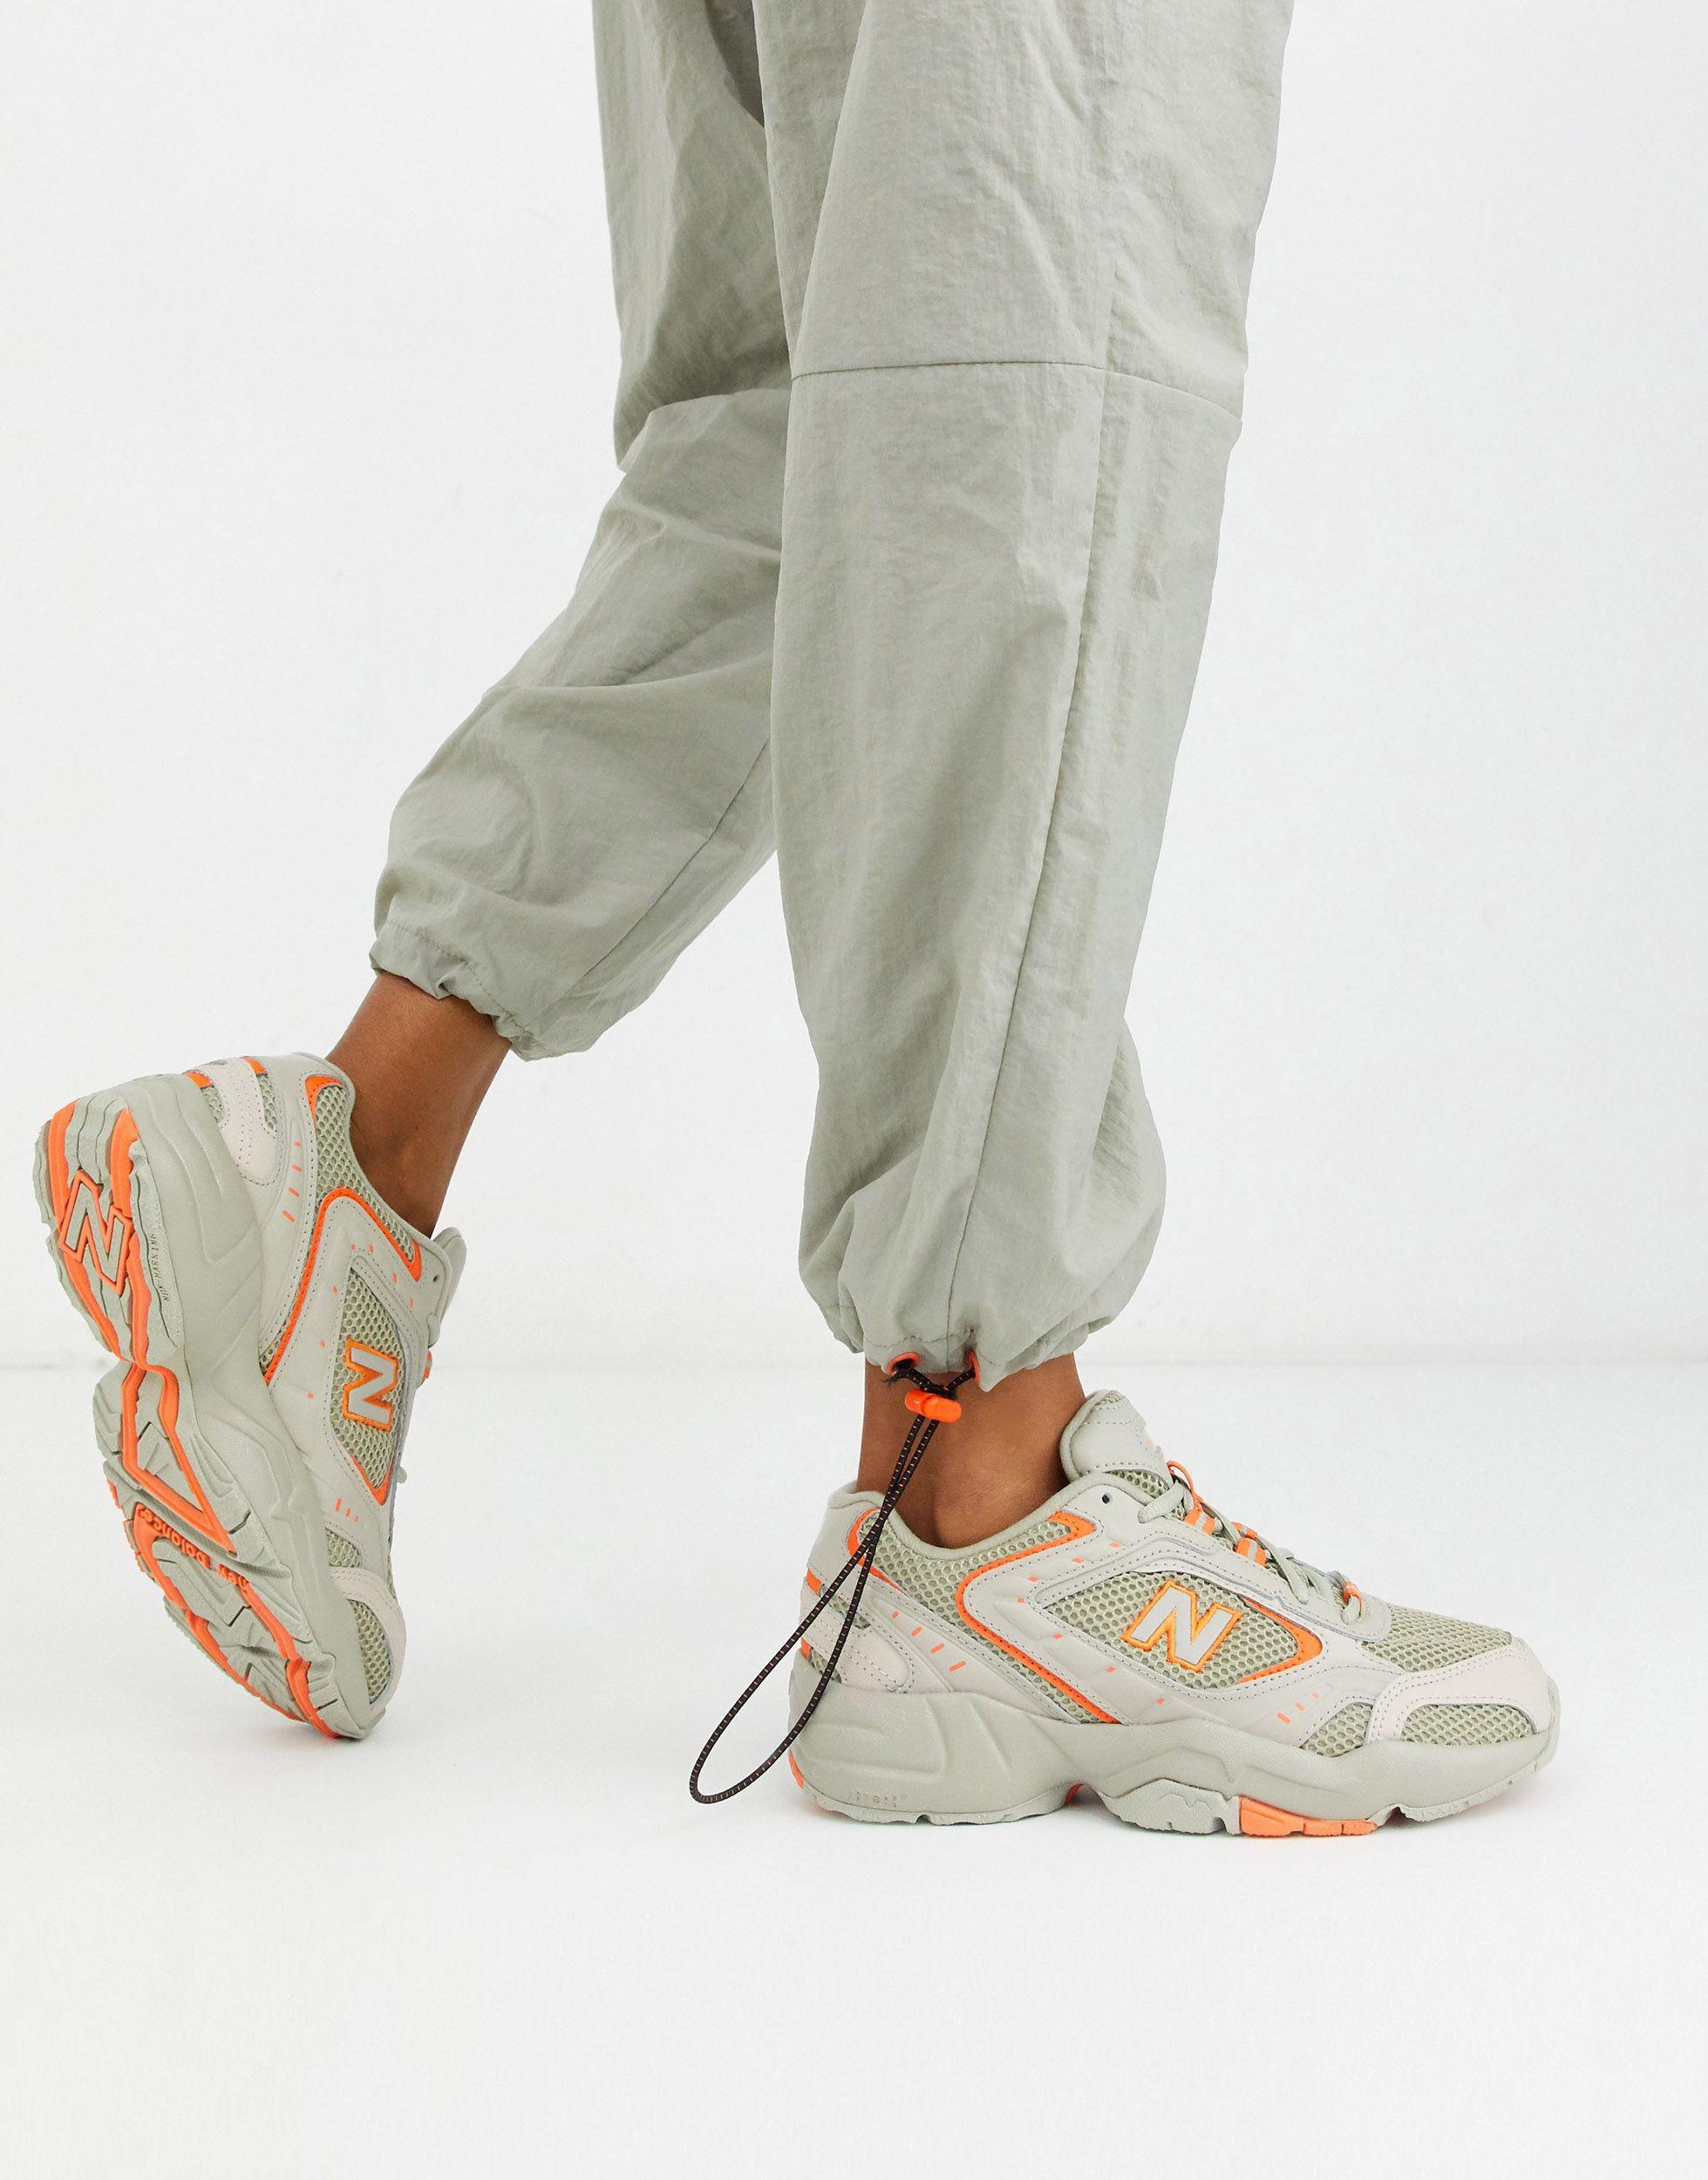 New Balance Utility Pack 452 Trainers in Gray - Lyst